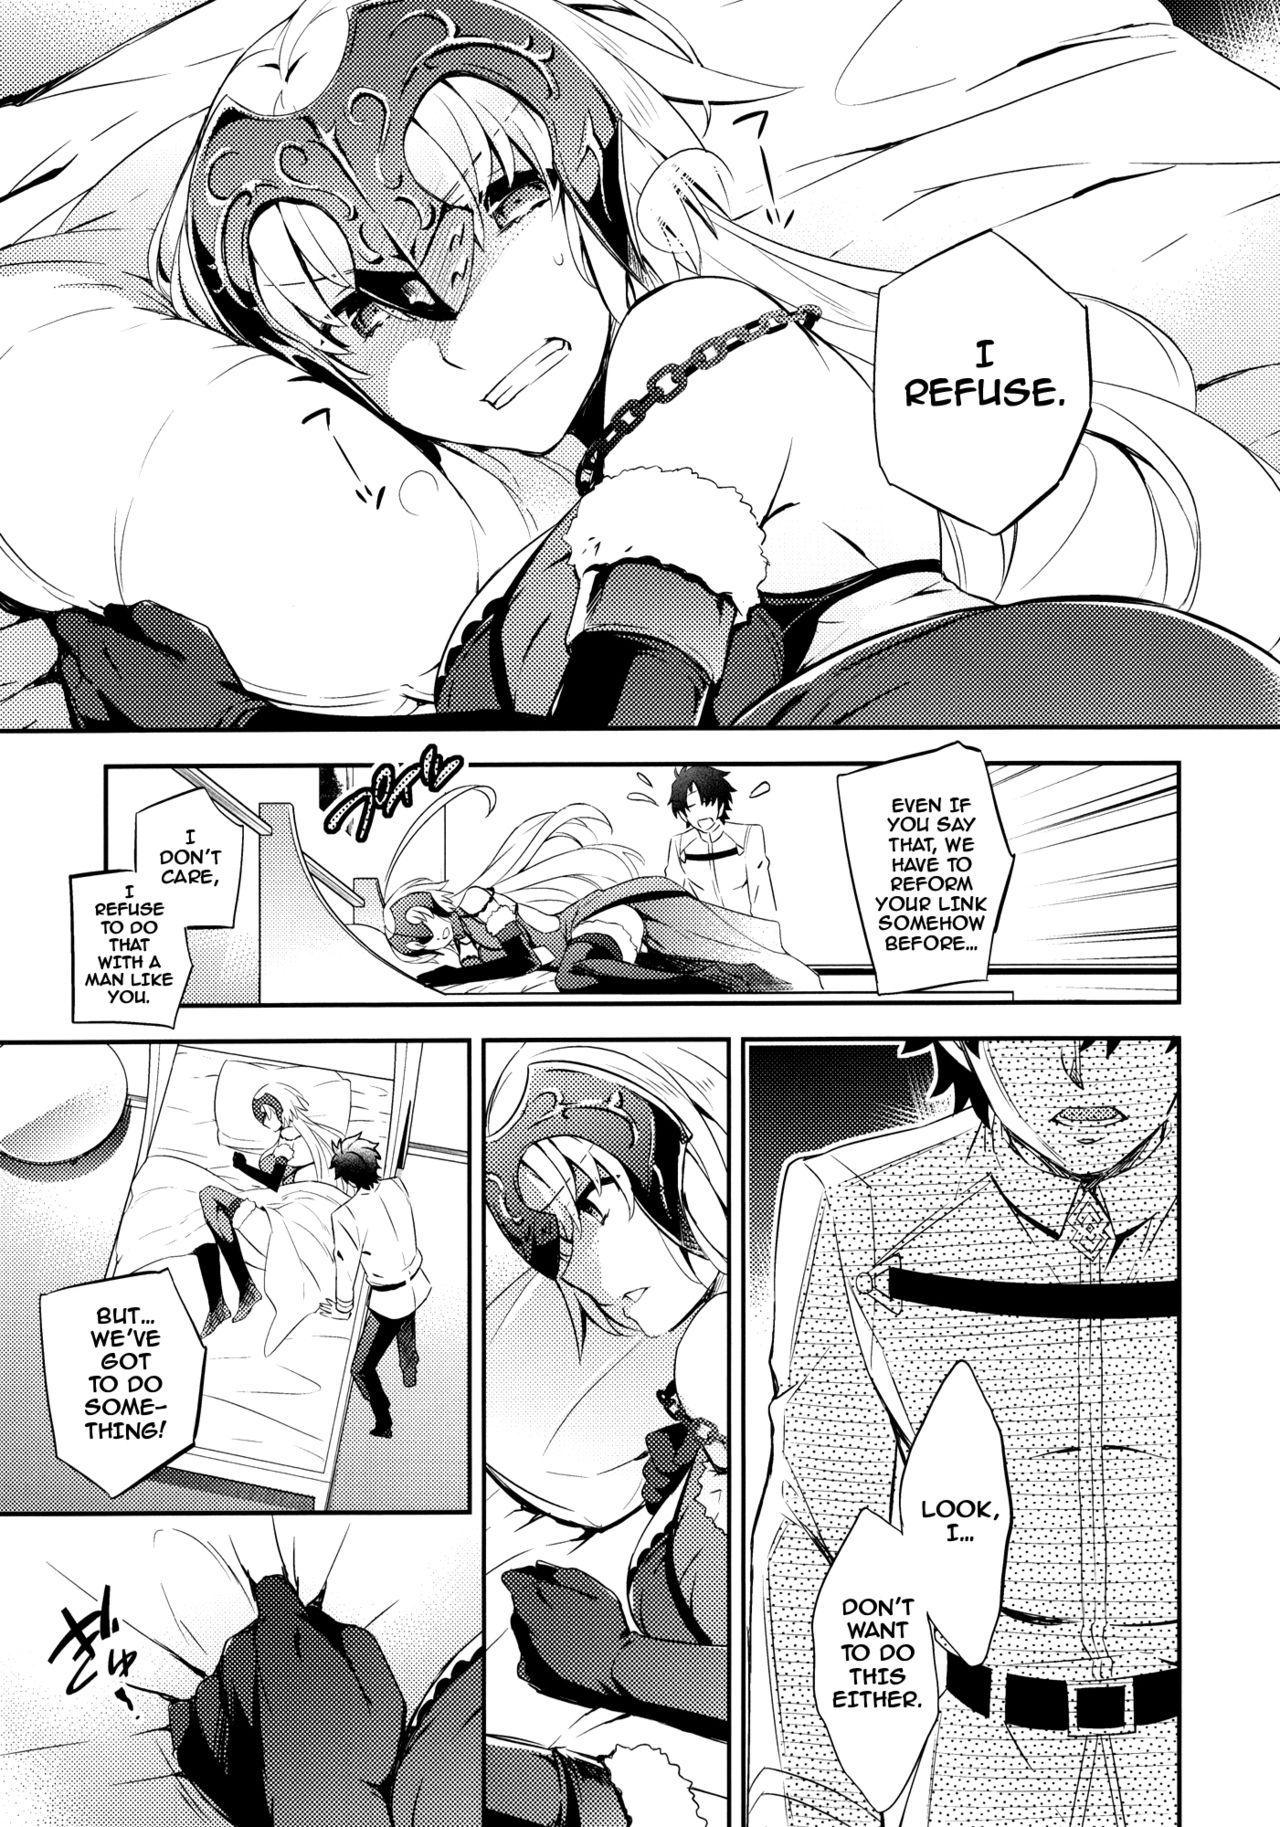 Gay Friend (C91) [Crazy9 (Ichitaka)] C9-26 Jeanne Alter-chan to Maryoku Kyoukyuu | Mana Transfers With Little Miss Jeanne Alter (Fate/Grand Order) [English] {darknight} - Fate grand order Gostoso - Page 5